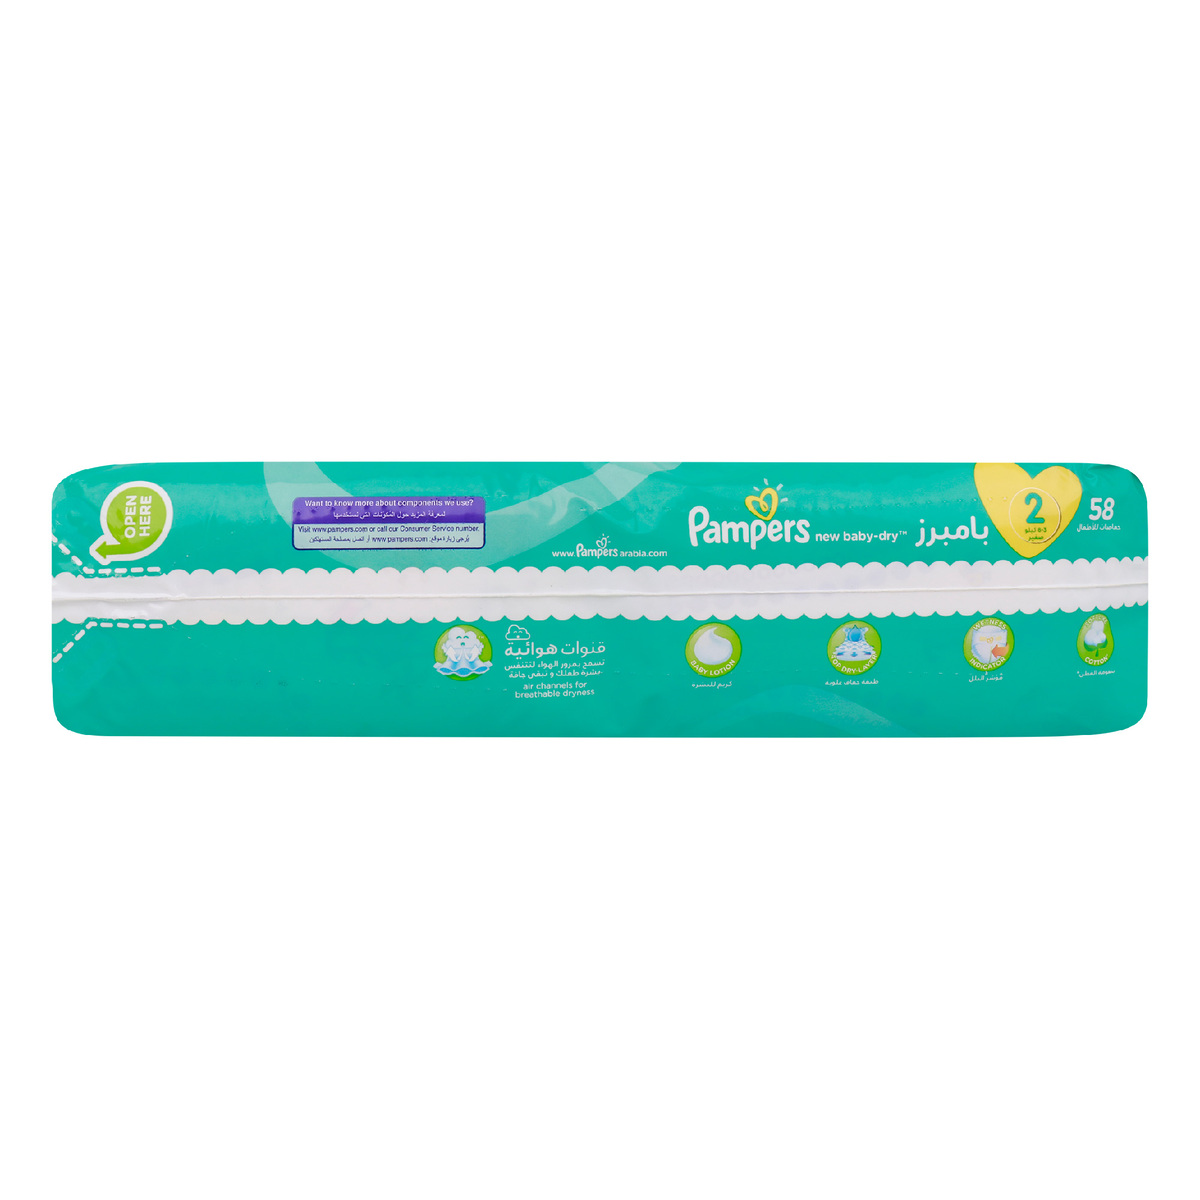 Pampers Baby-dry Taille 2 (3-8 kg) - 10 Couches 